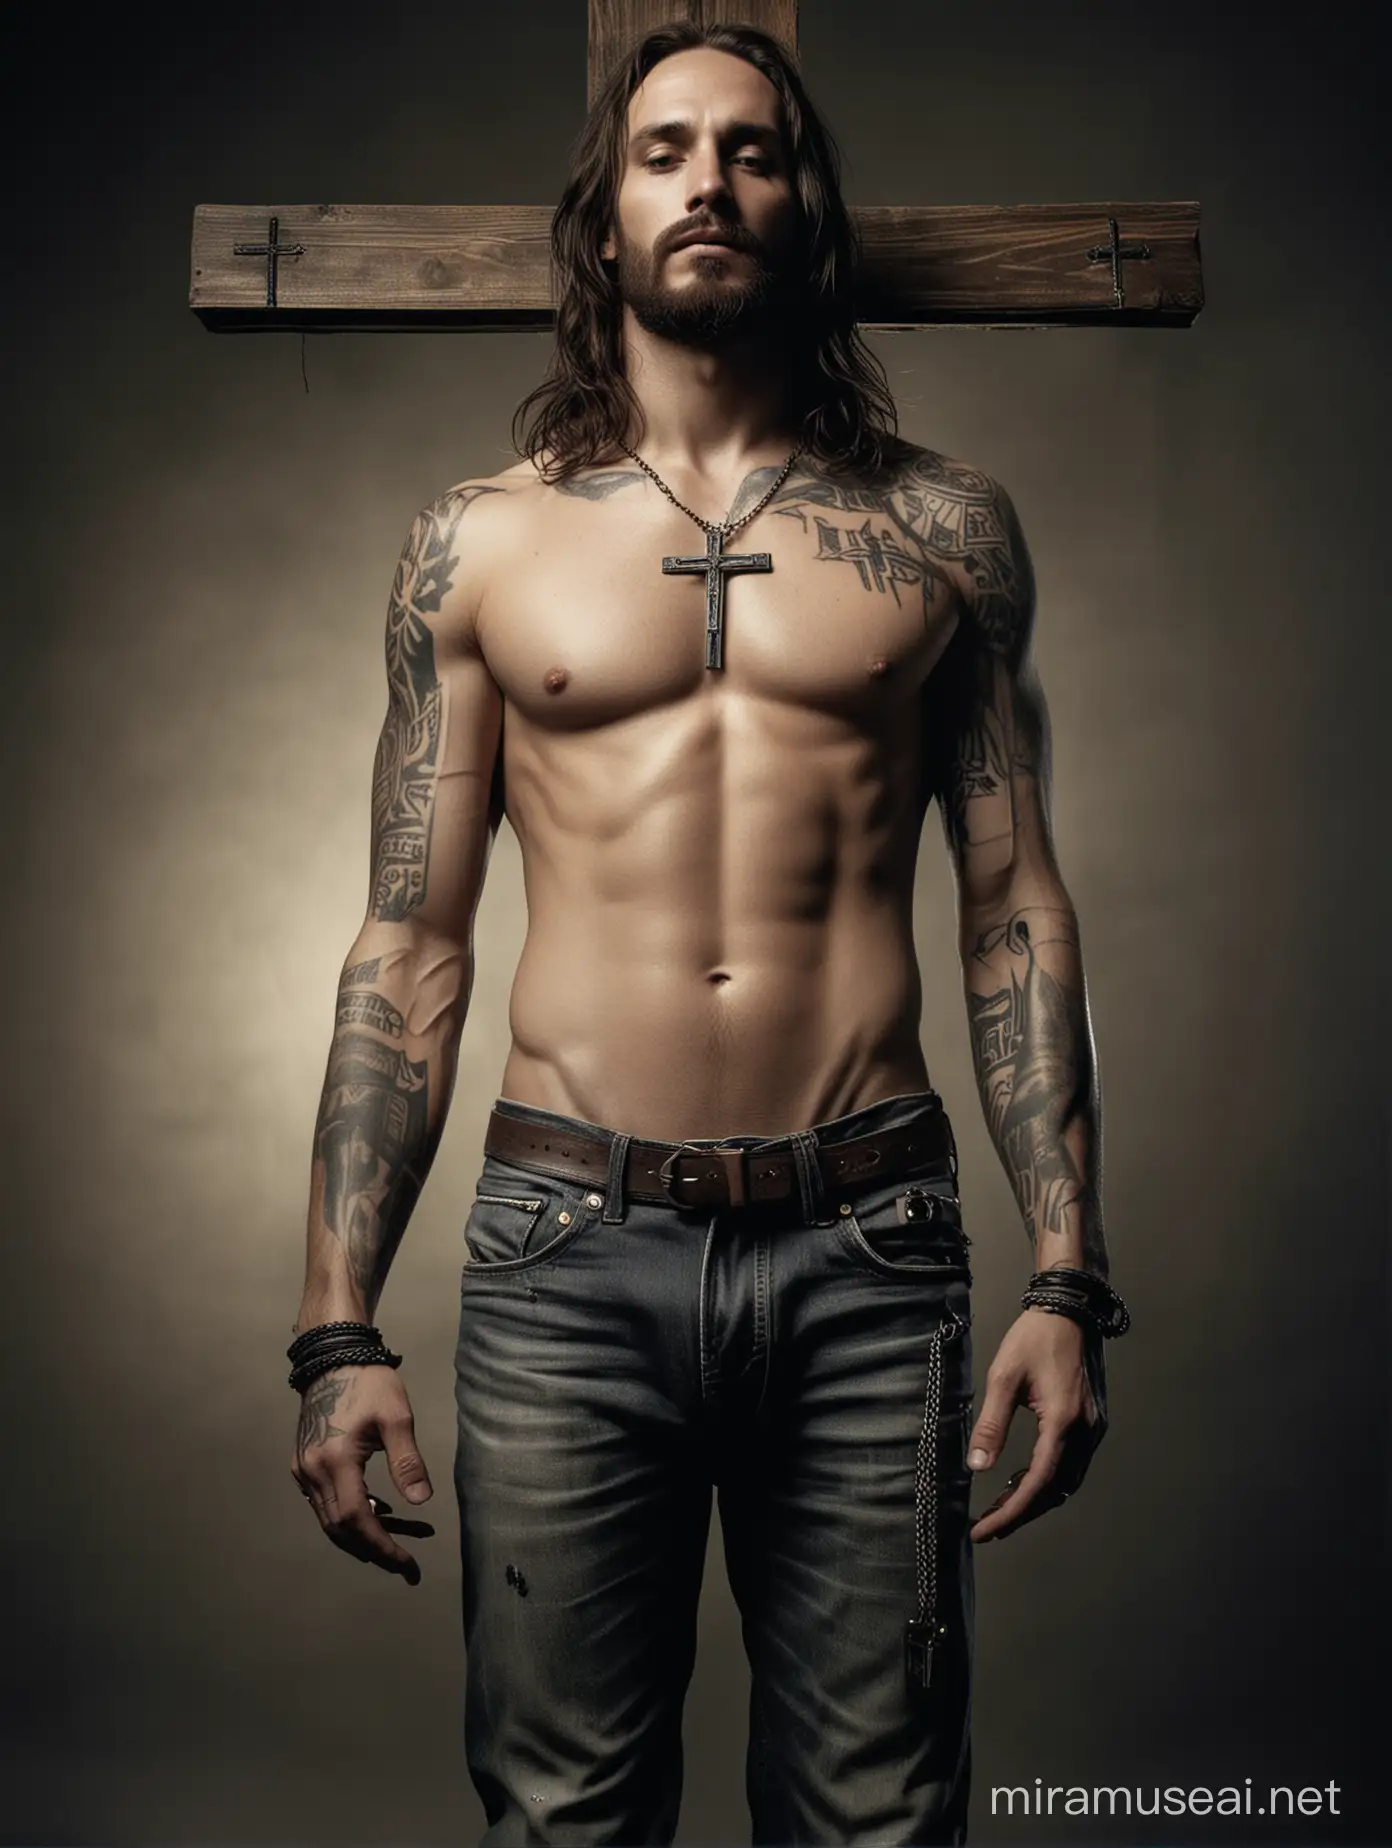 Sexy Topless Jesus Christ with Russian GangStyle Tattoos and Crucifix